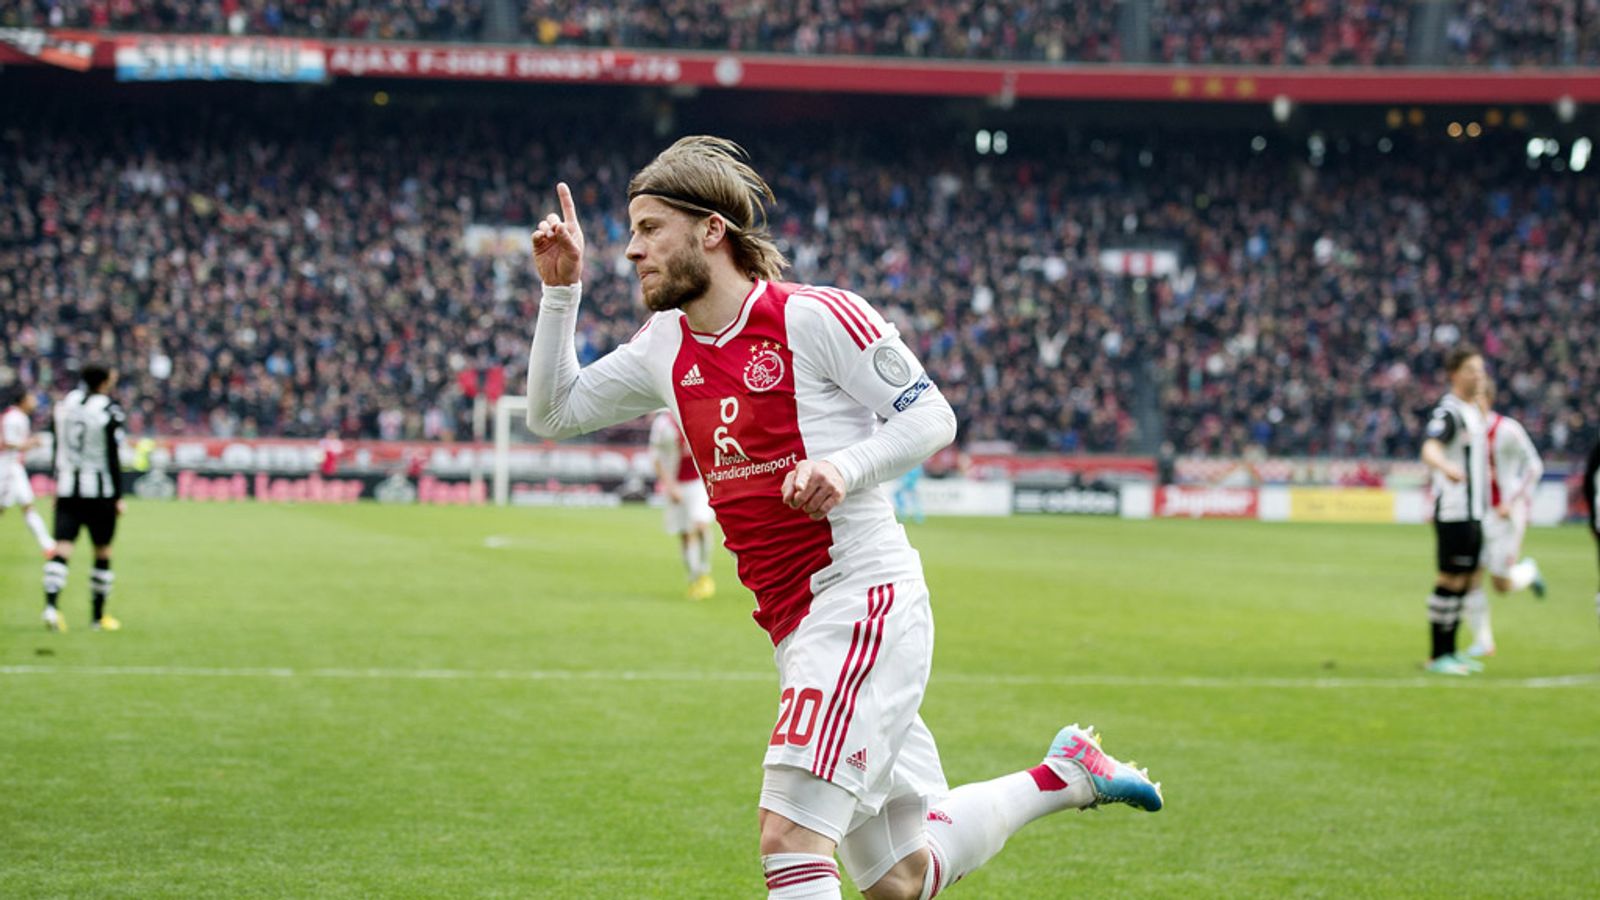 KNVB-Beker: Holders Alkmaar and Ajax head through after extra-time scares, Football News